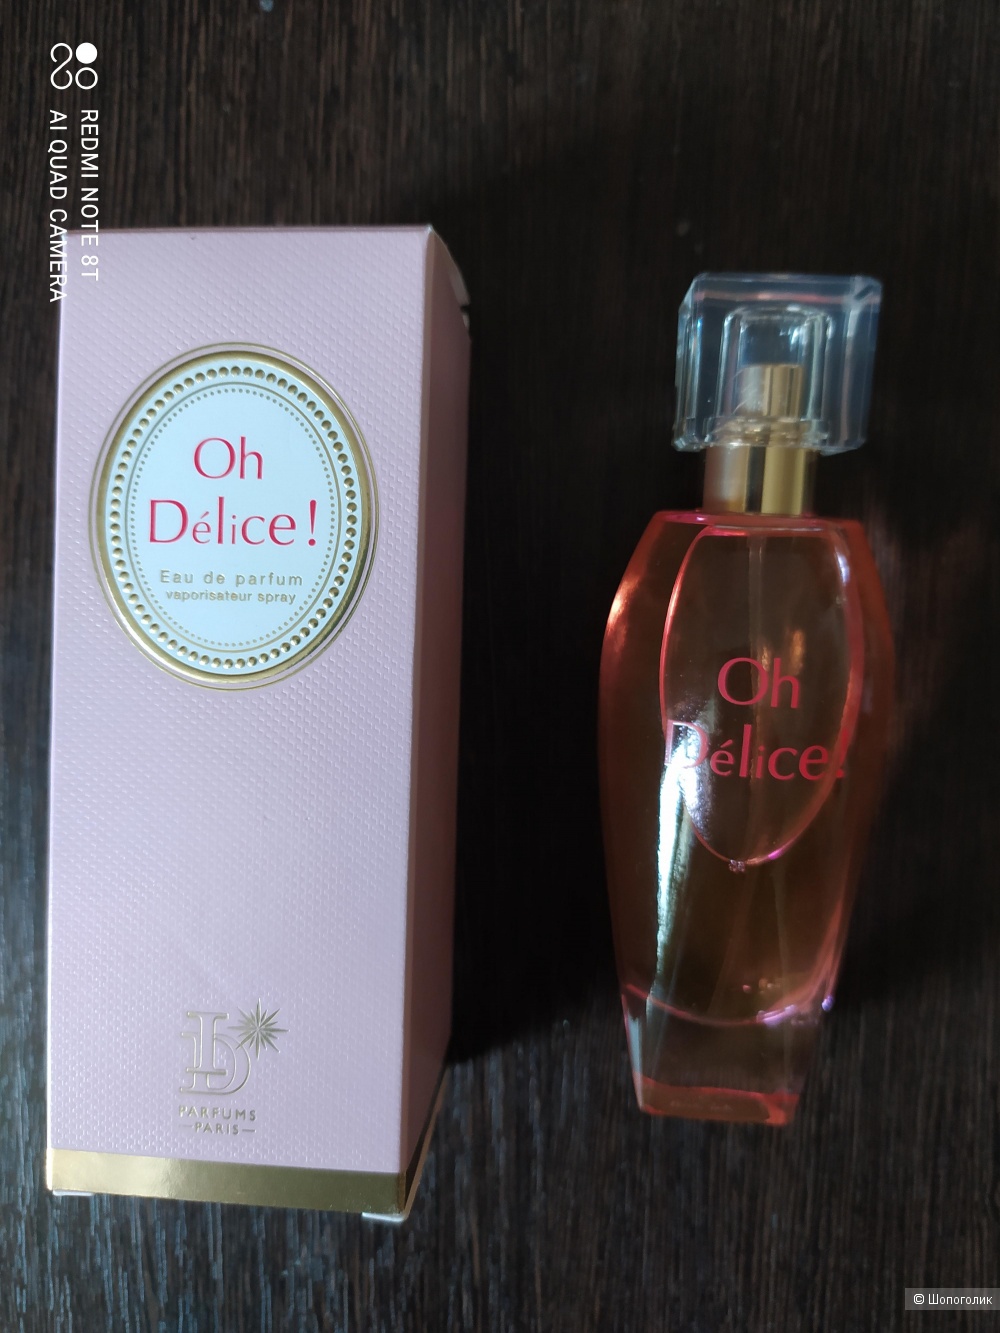 Парфюмерная вода Oh Delice! от ID Parfums , 50 мл.